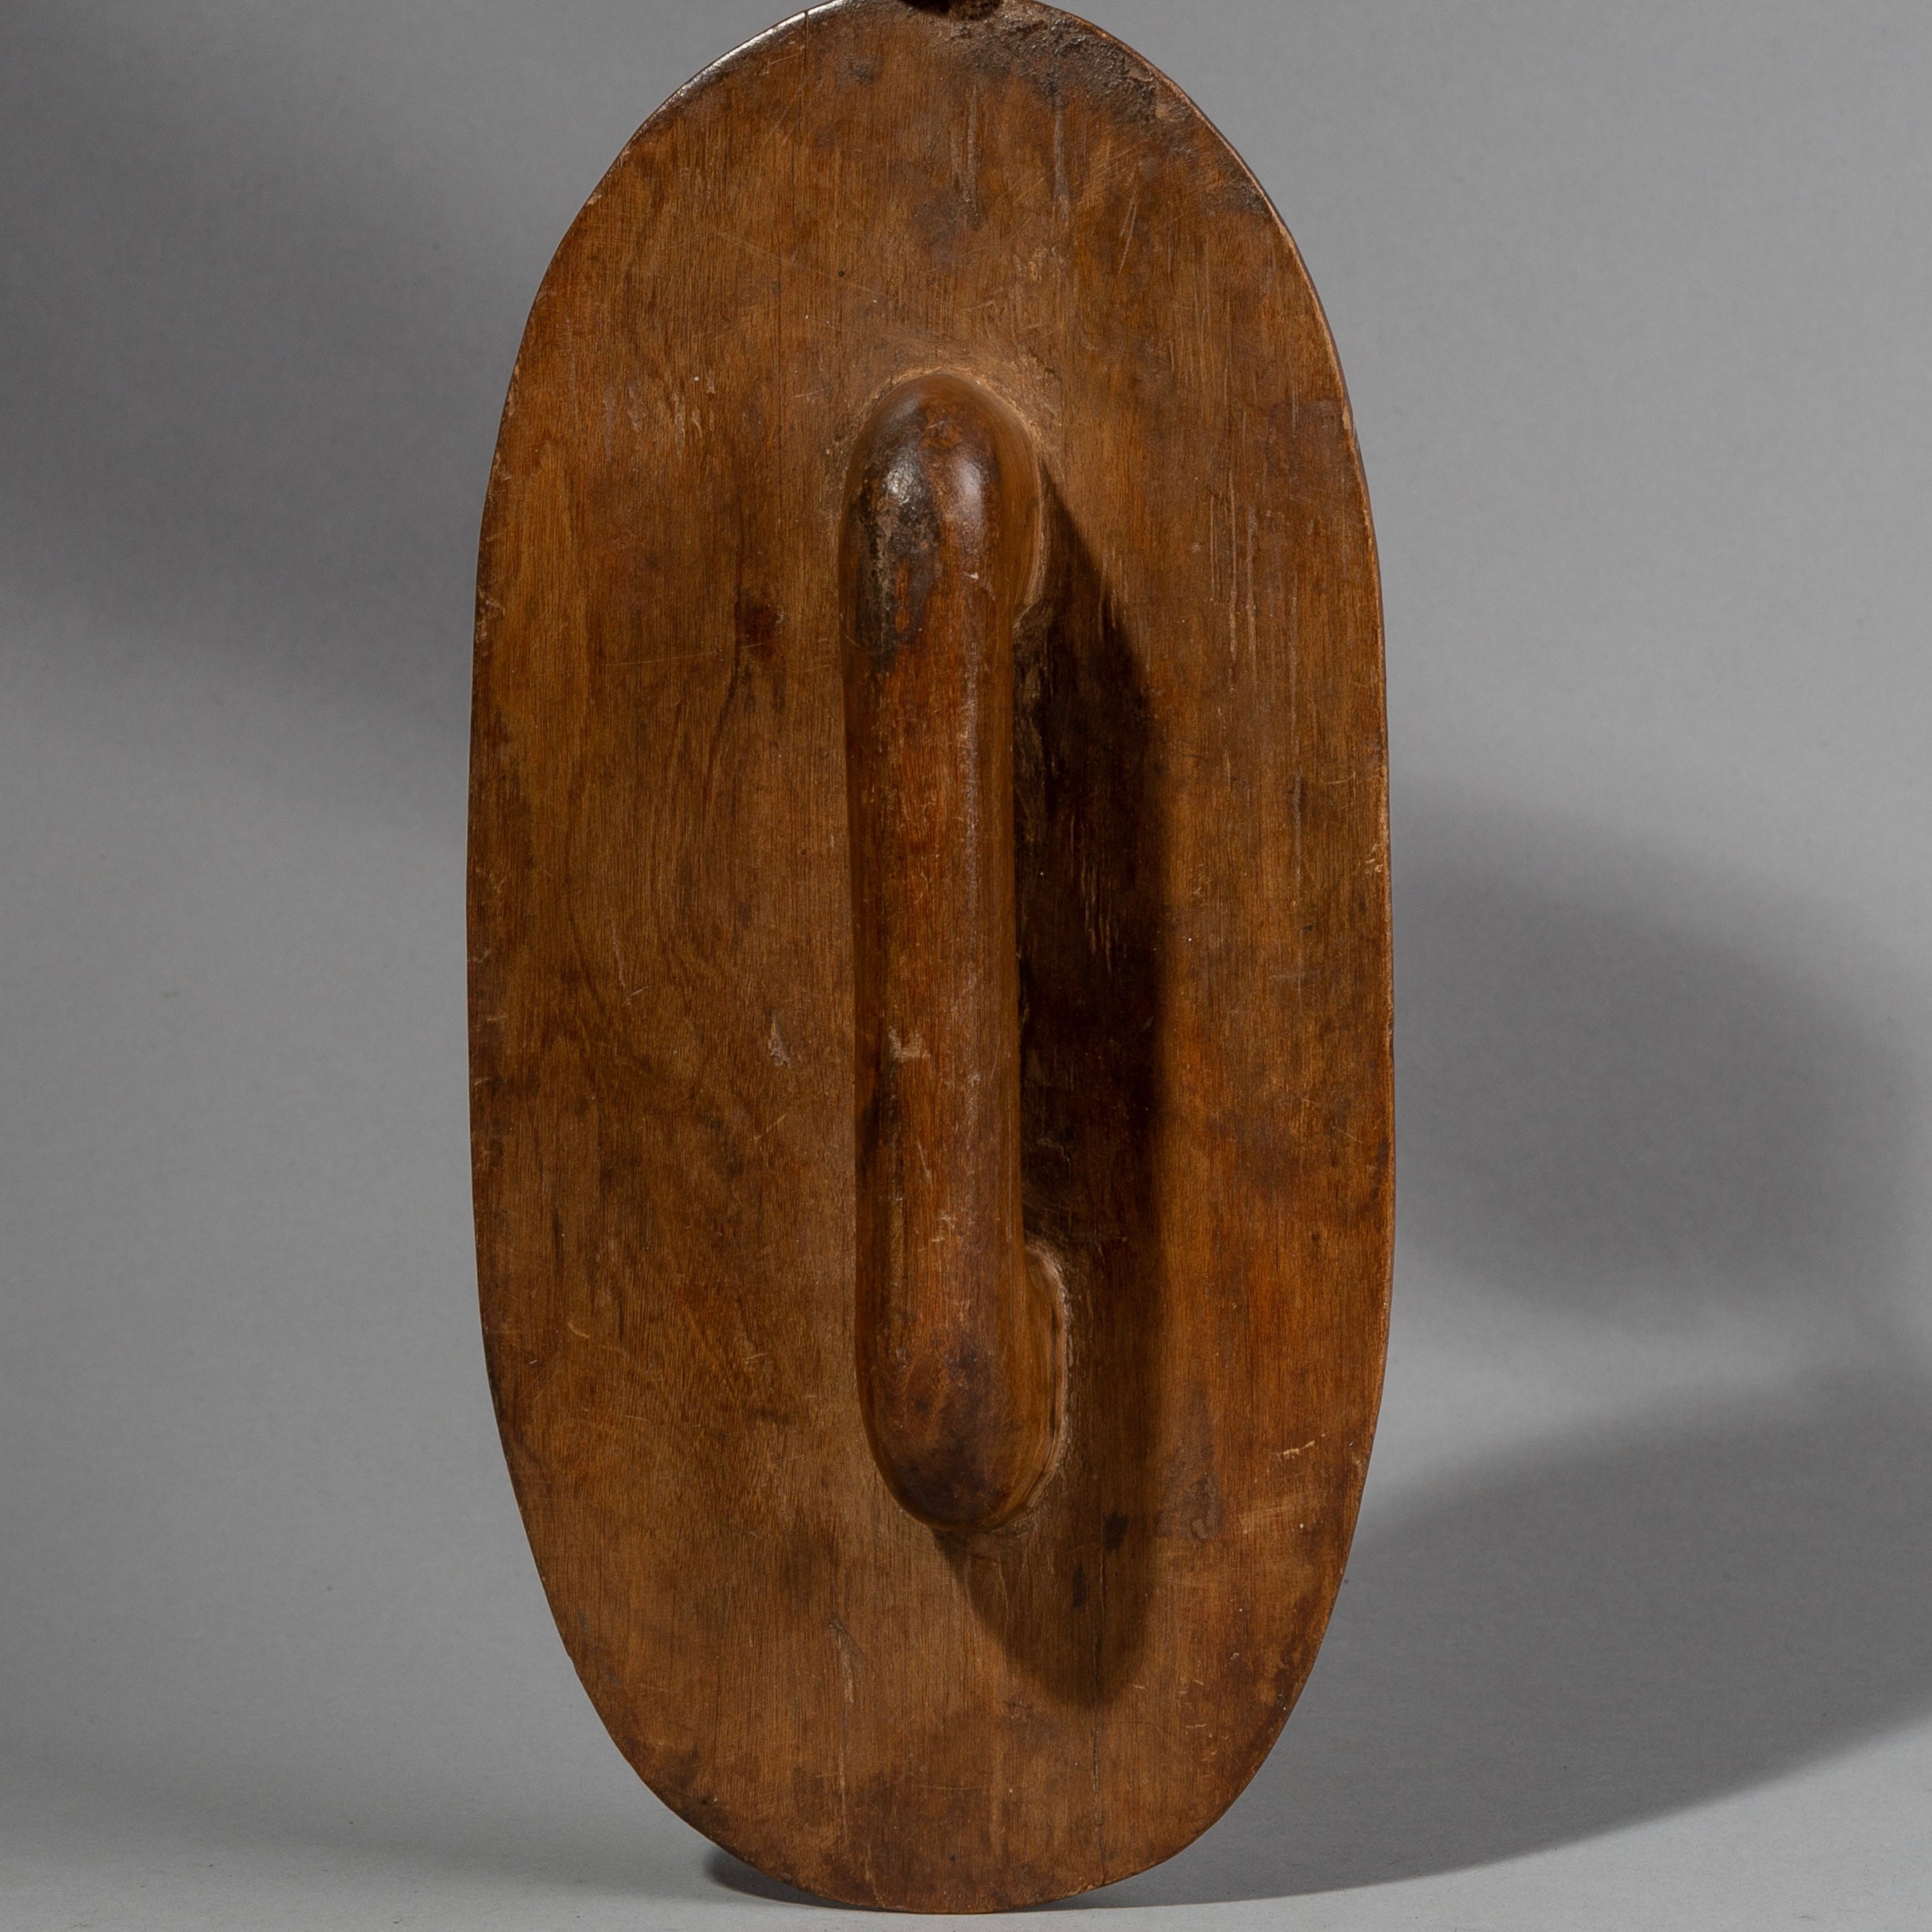 A SMALL WOODEN SHIELD FROM KENYA, EAST AFRICA( No 1654)